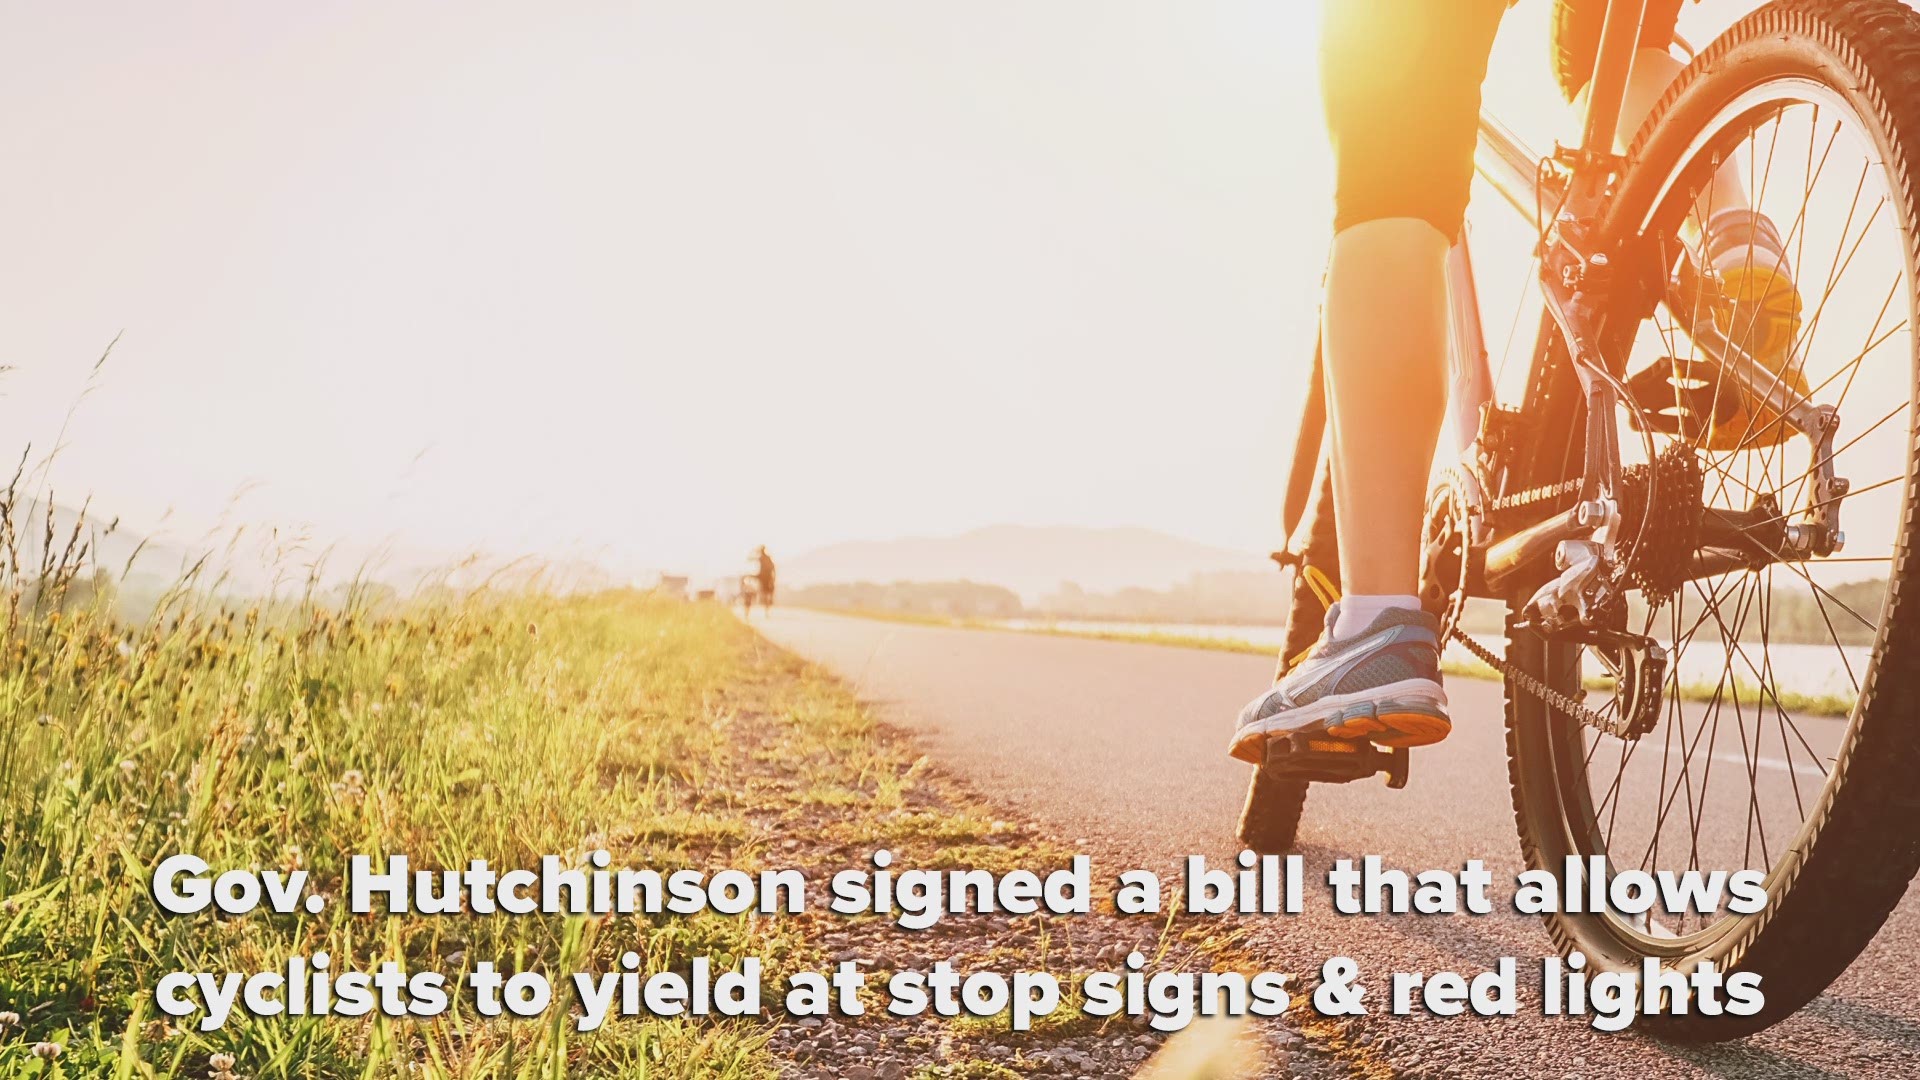 The bill would allow cyclists to yield at both stop signs and red lights.